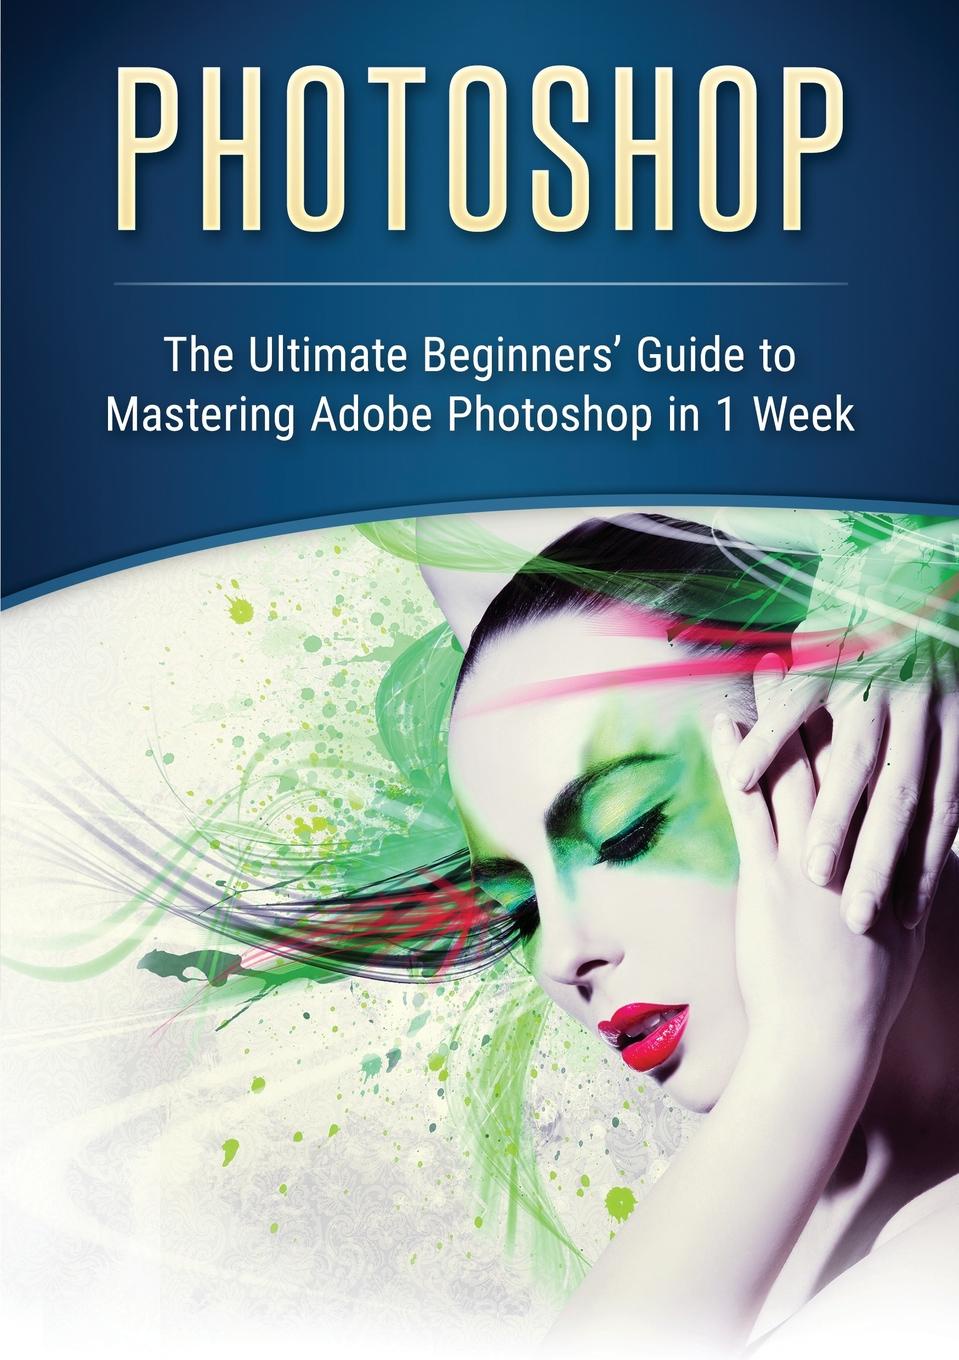 Photoshop. The Ultimate Beginners` Guide to Mastering Adobe Photoshop in 1 Week